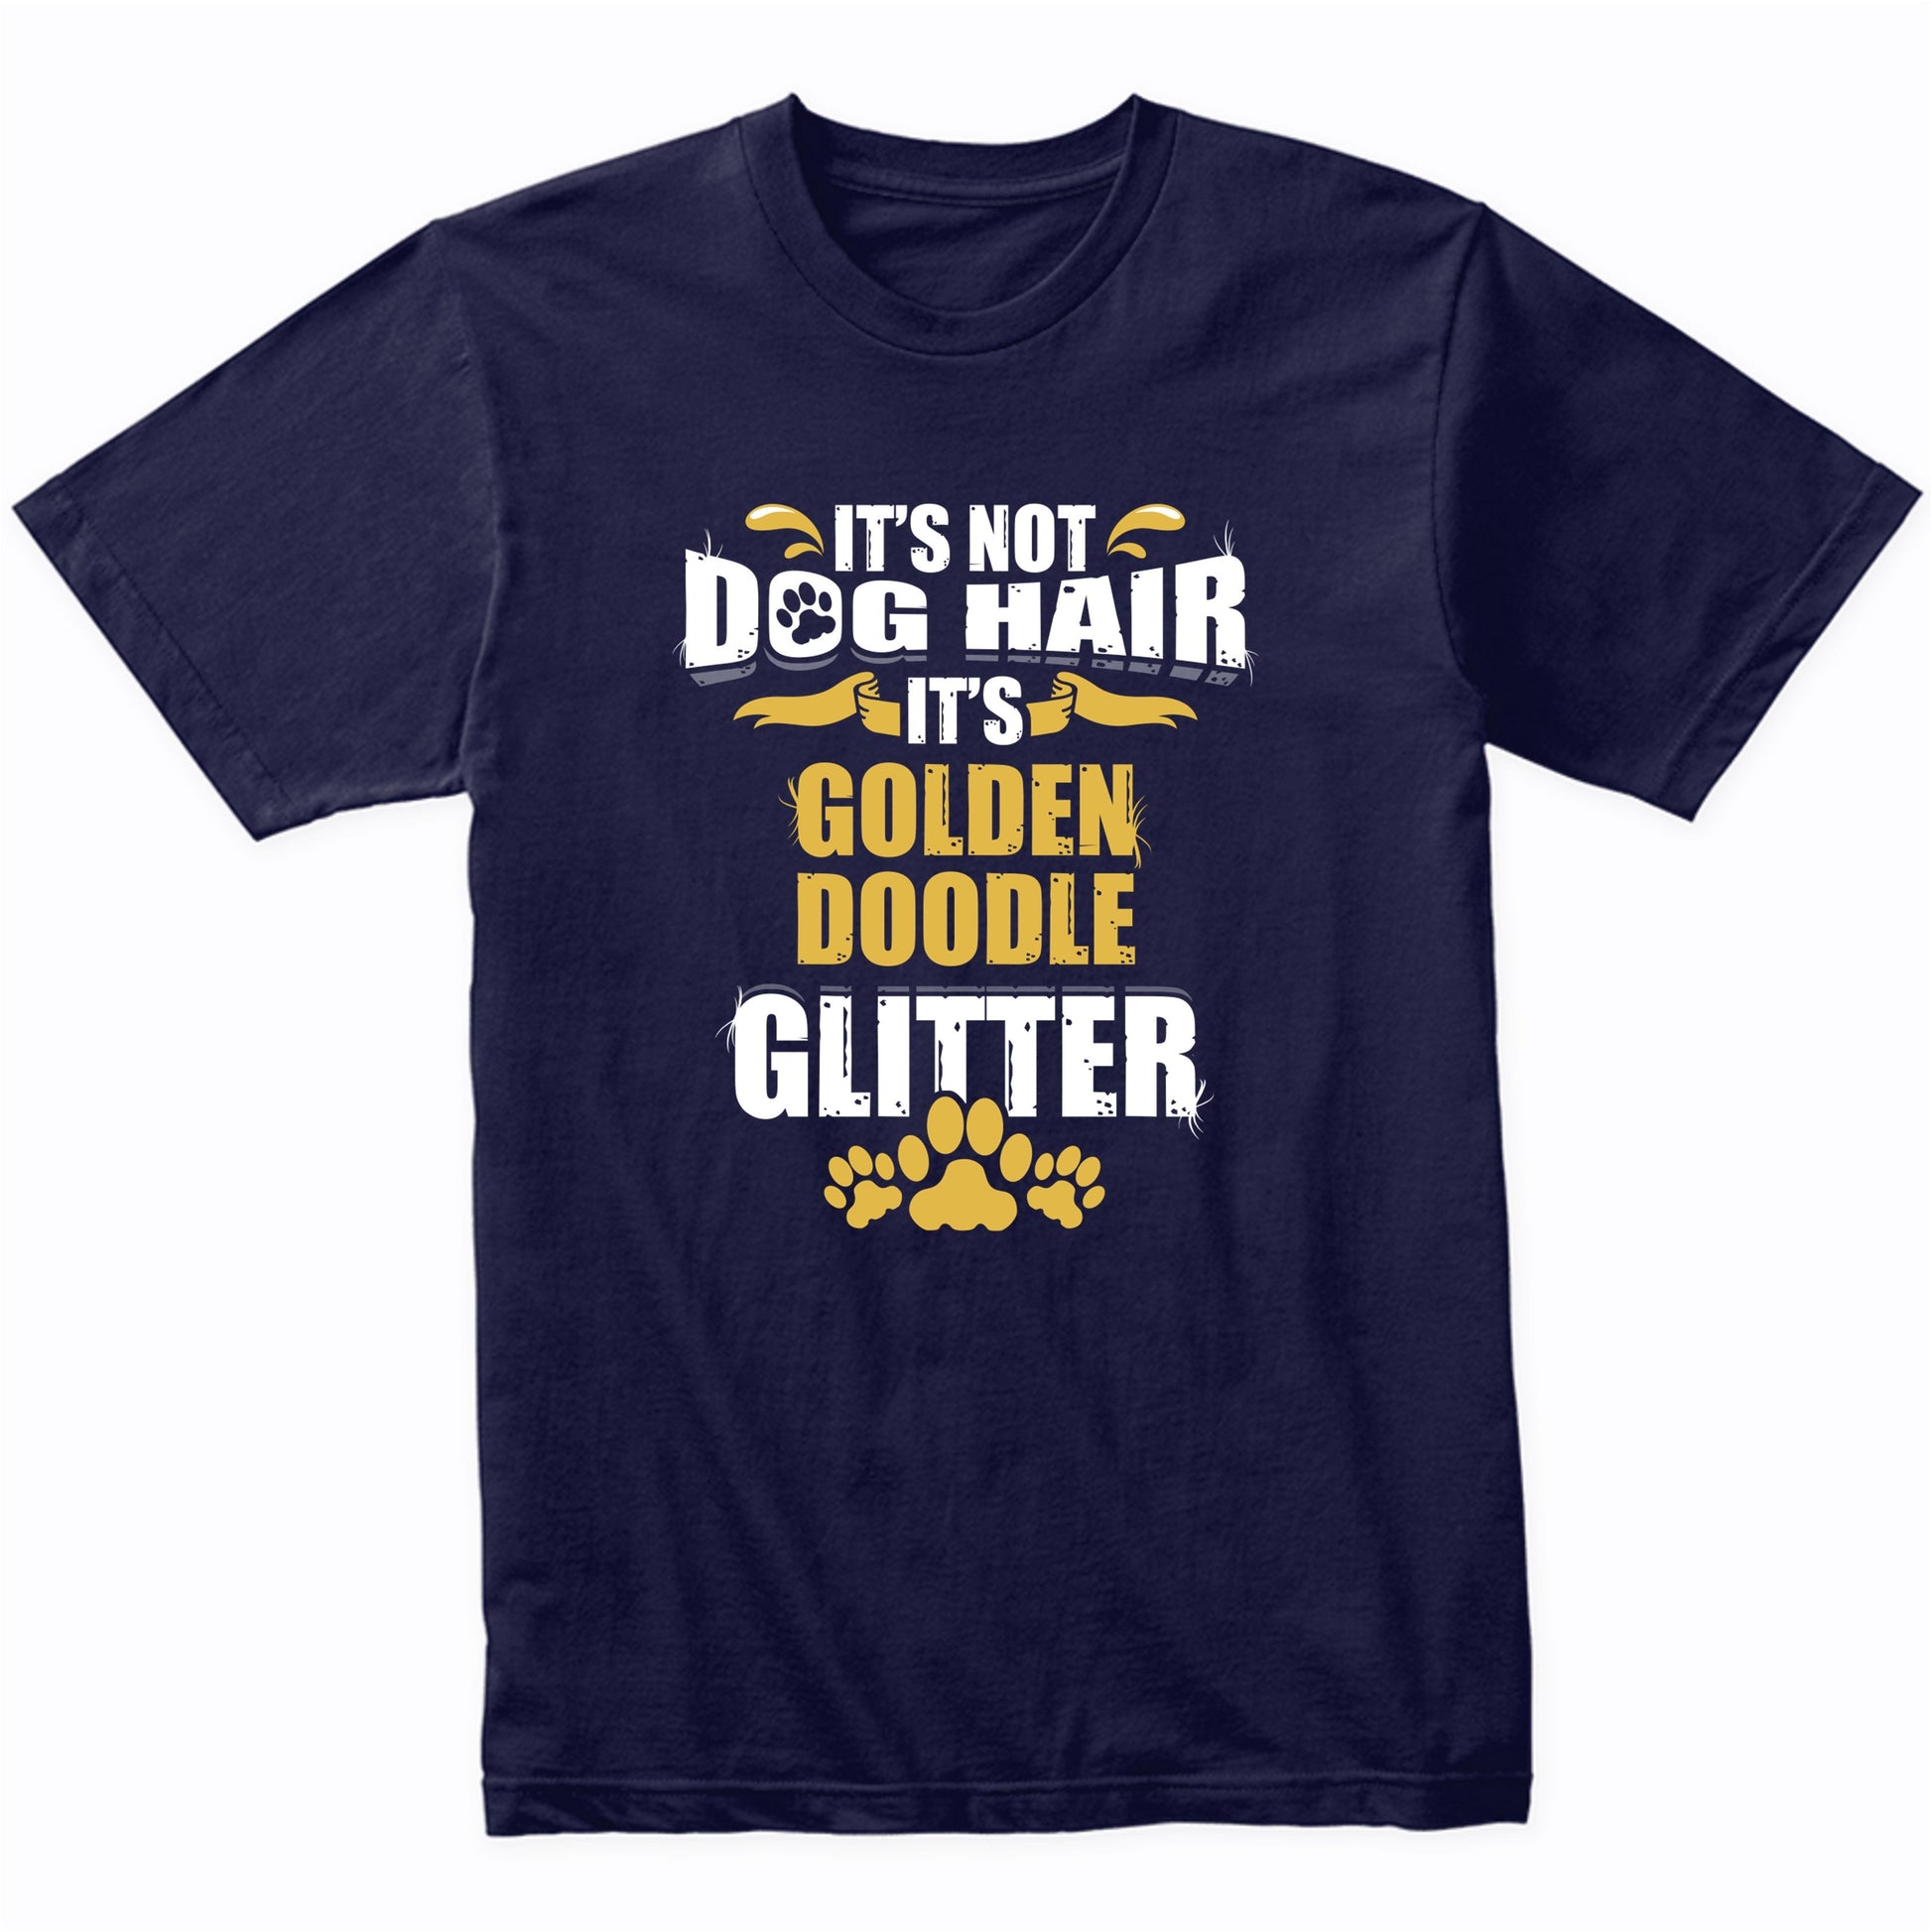 It's Not Dog Hair It's Goldendoodle Glitter T-Shirt